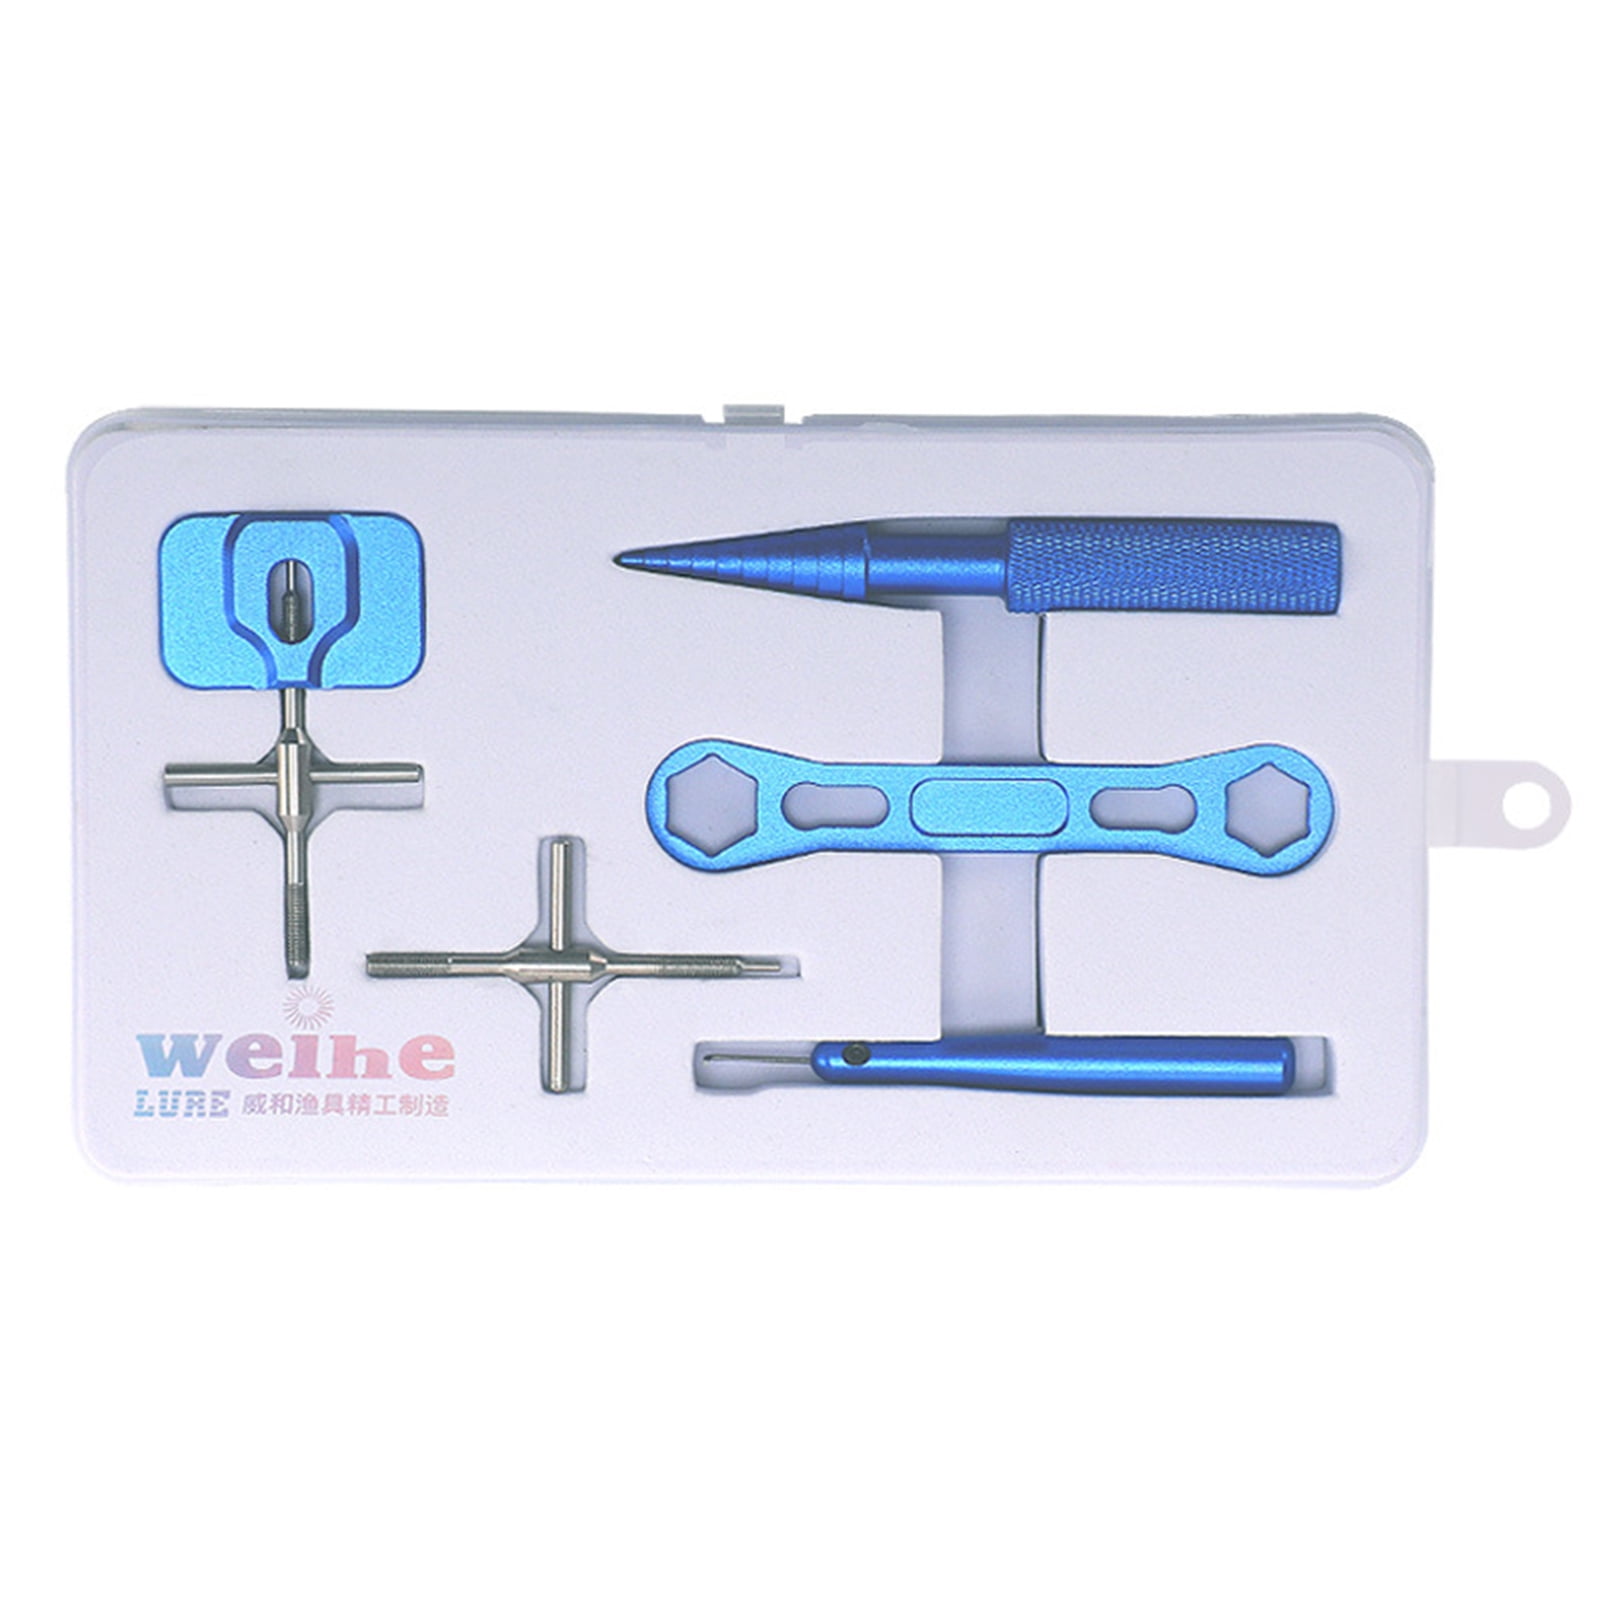 WEIHE Maintenance Kit - Essential Tools for Fishing Reel